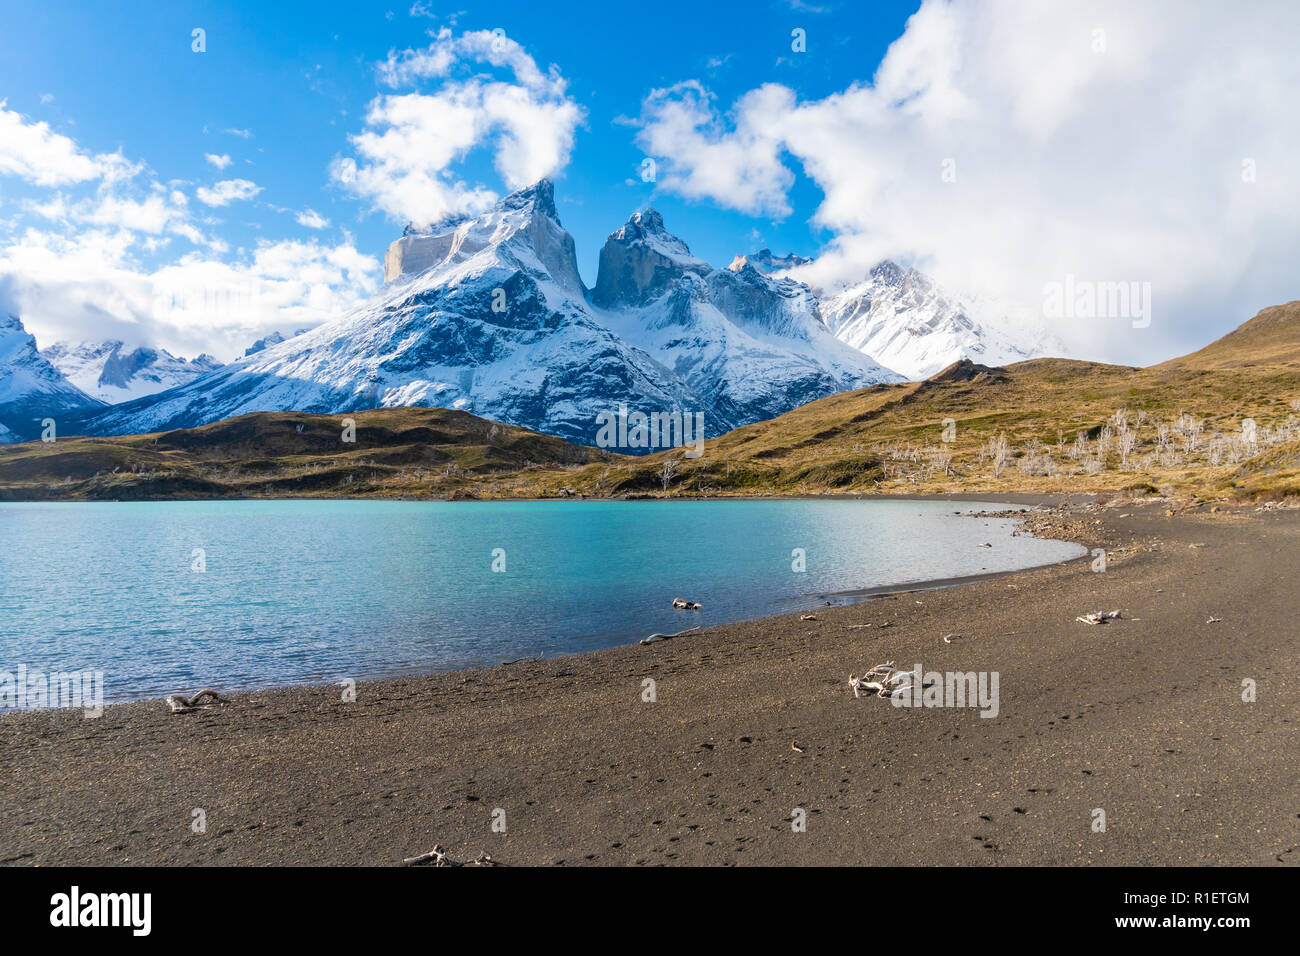 Cuernos del Paine mountains in Torres del Paine National Park in Chile Stock Photo